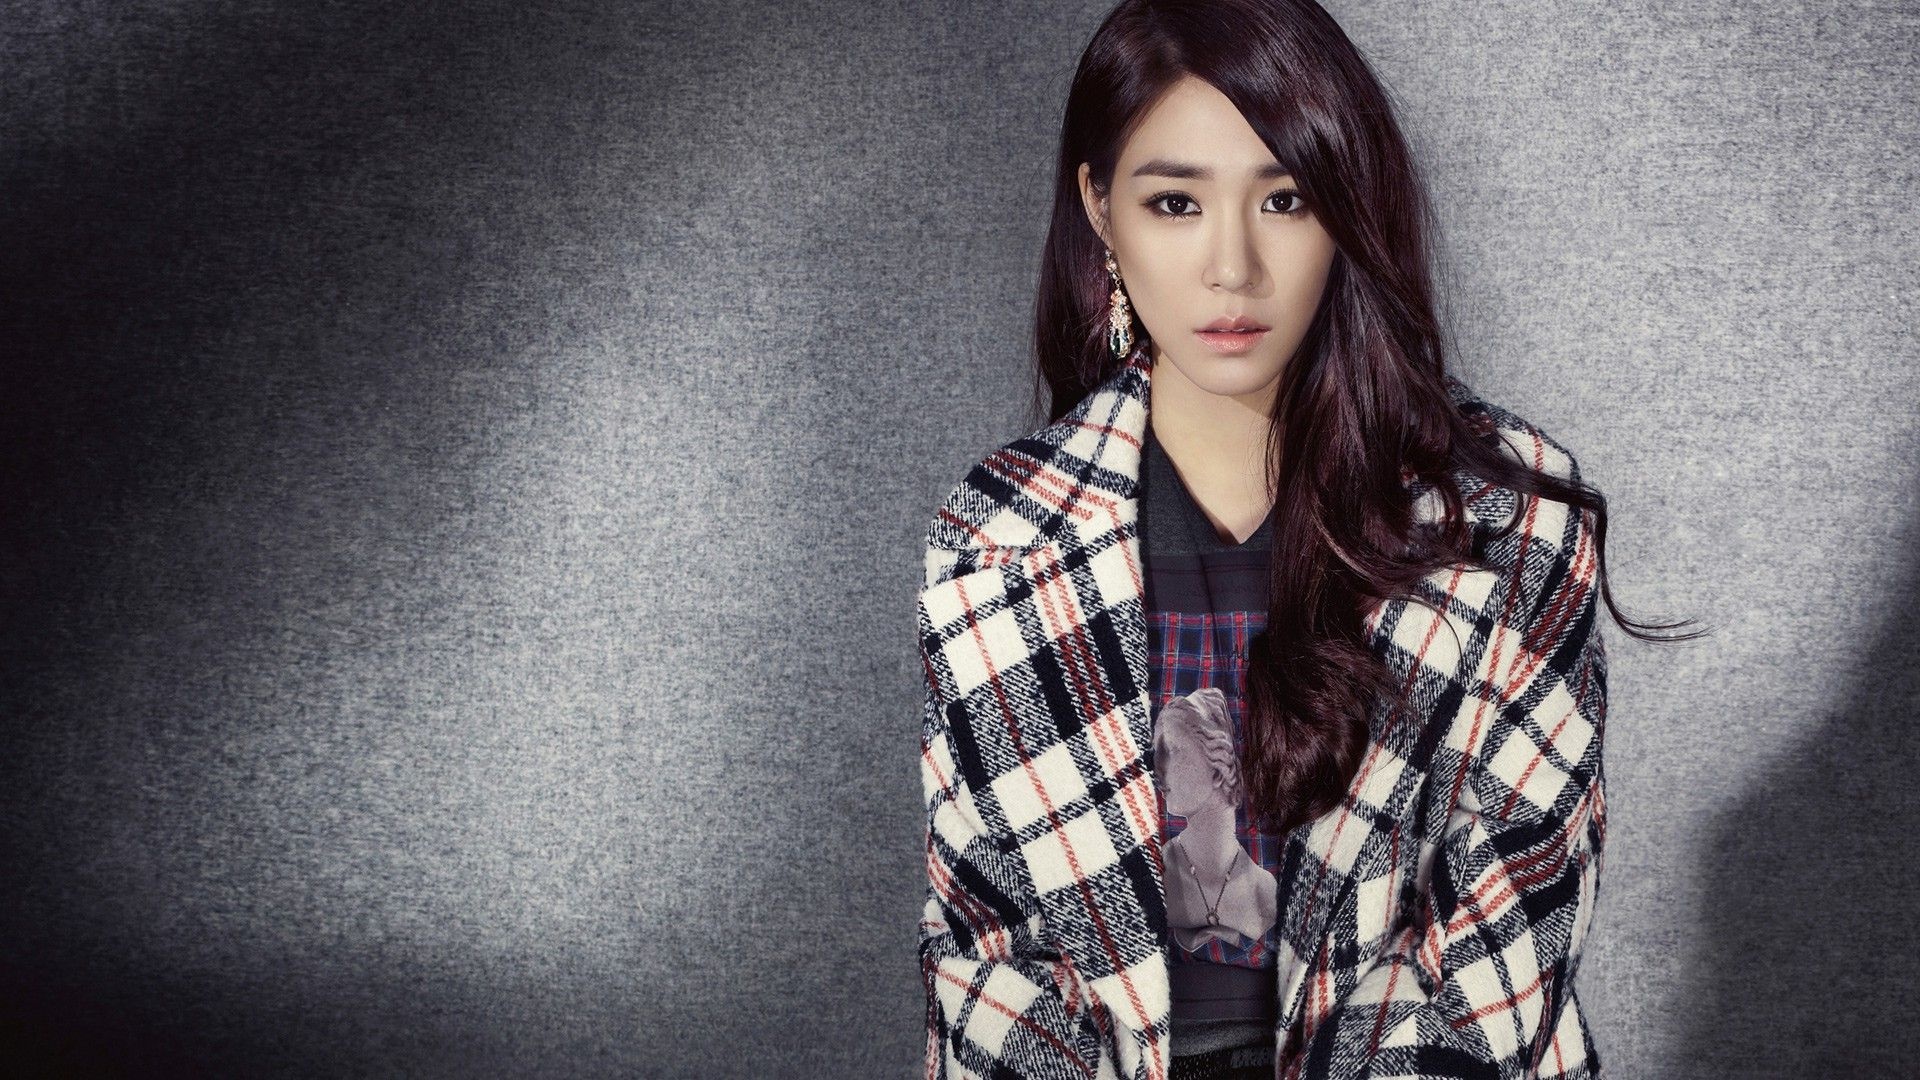 Tiffany Young music, Girls' Generation member, Stunning wallpapers, Vocal talent, 1920x1080 Full HD Desktop